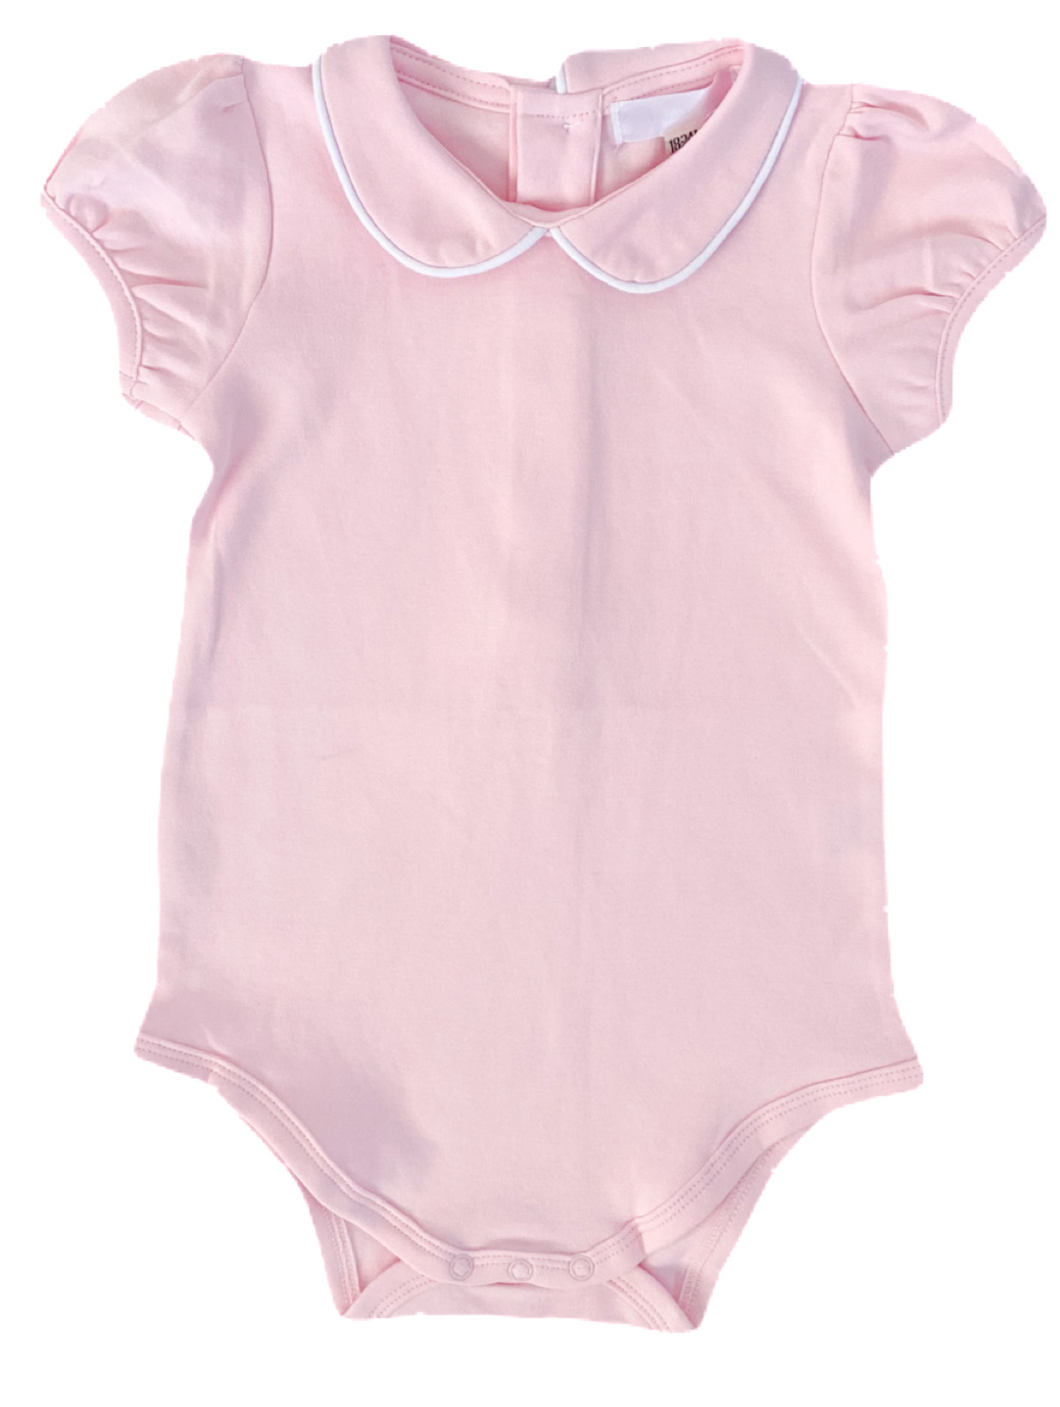 The Piped Collar Bodysuit - Classic Pink